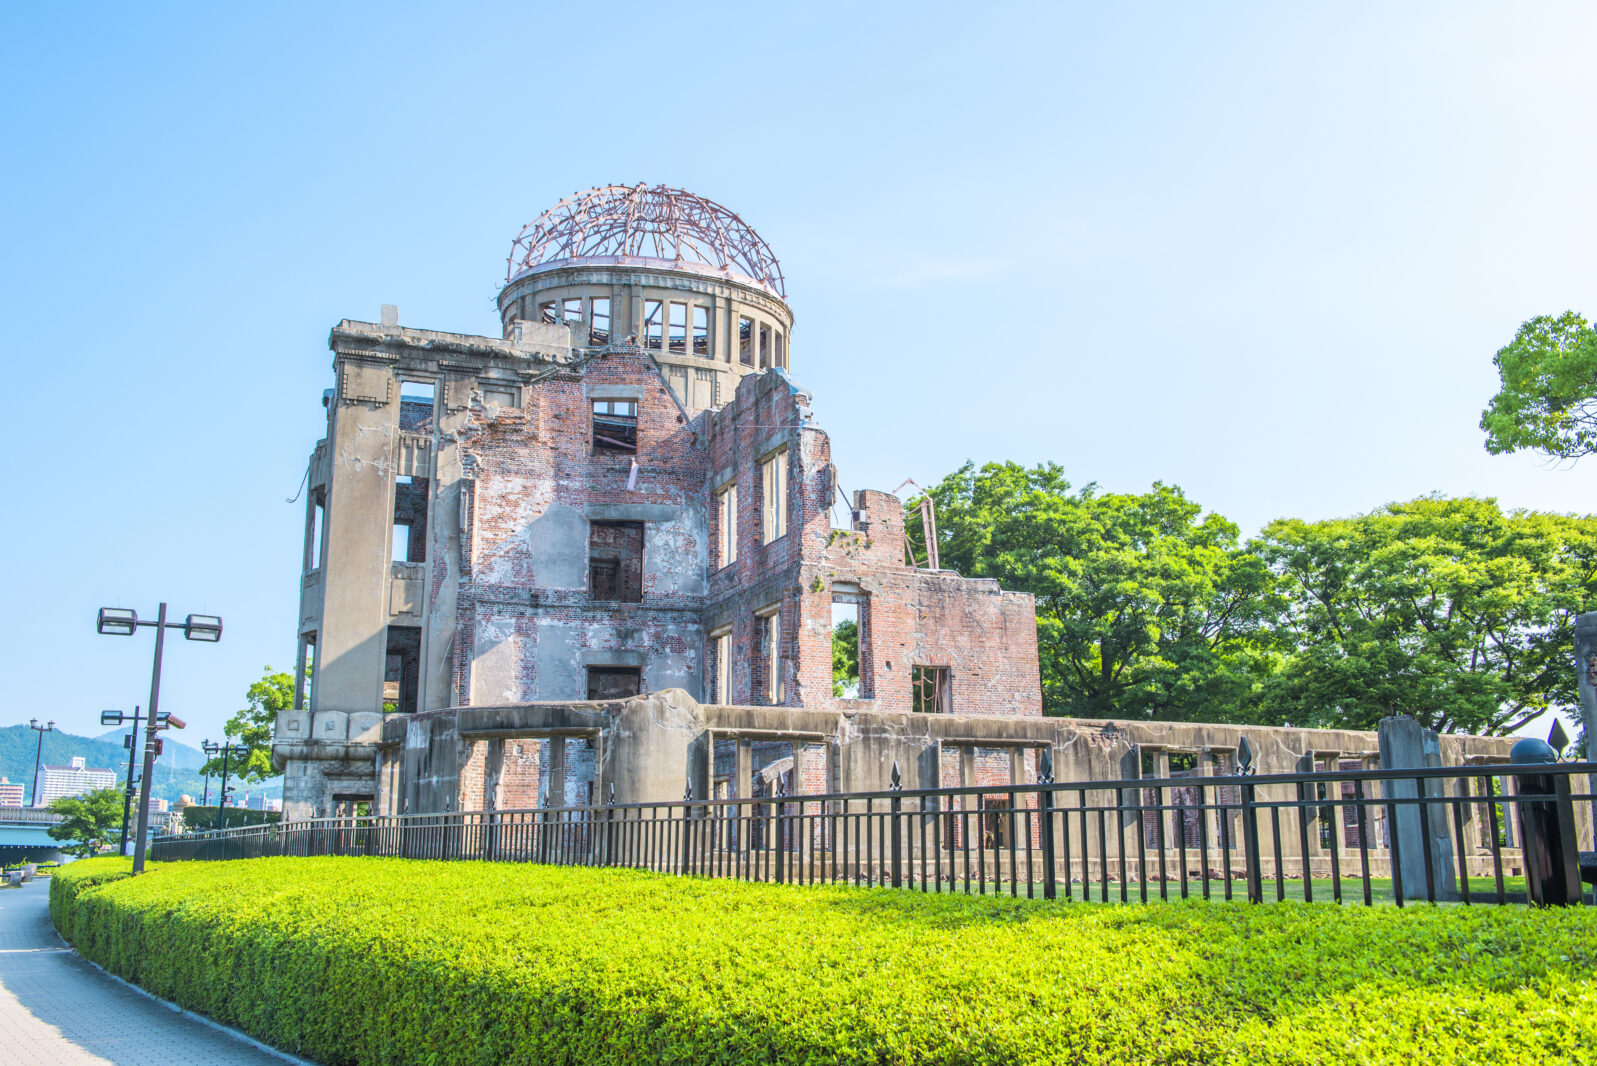 The Atomic Bomb Dome Panorama in Hiroshima and the surounding garden in autumn at sunset on the side of Motoyasu River in Japan, with the Peace Memorial Park